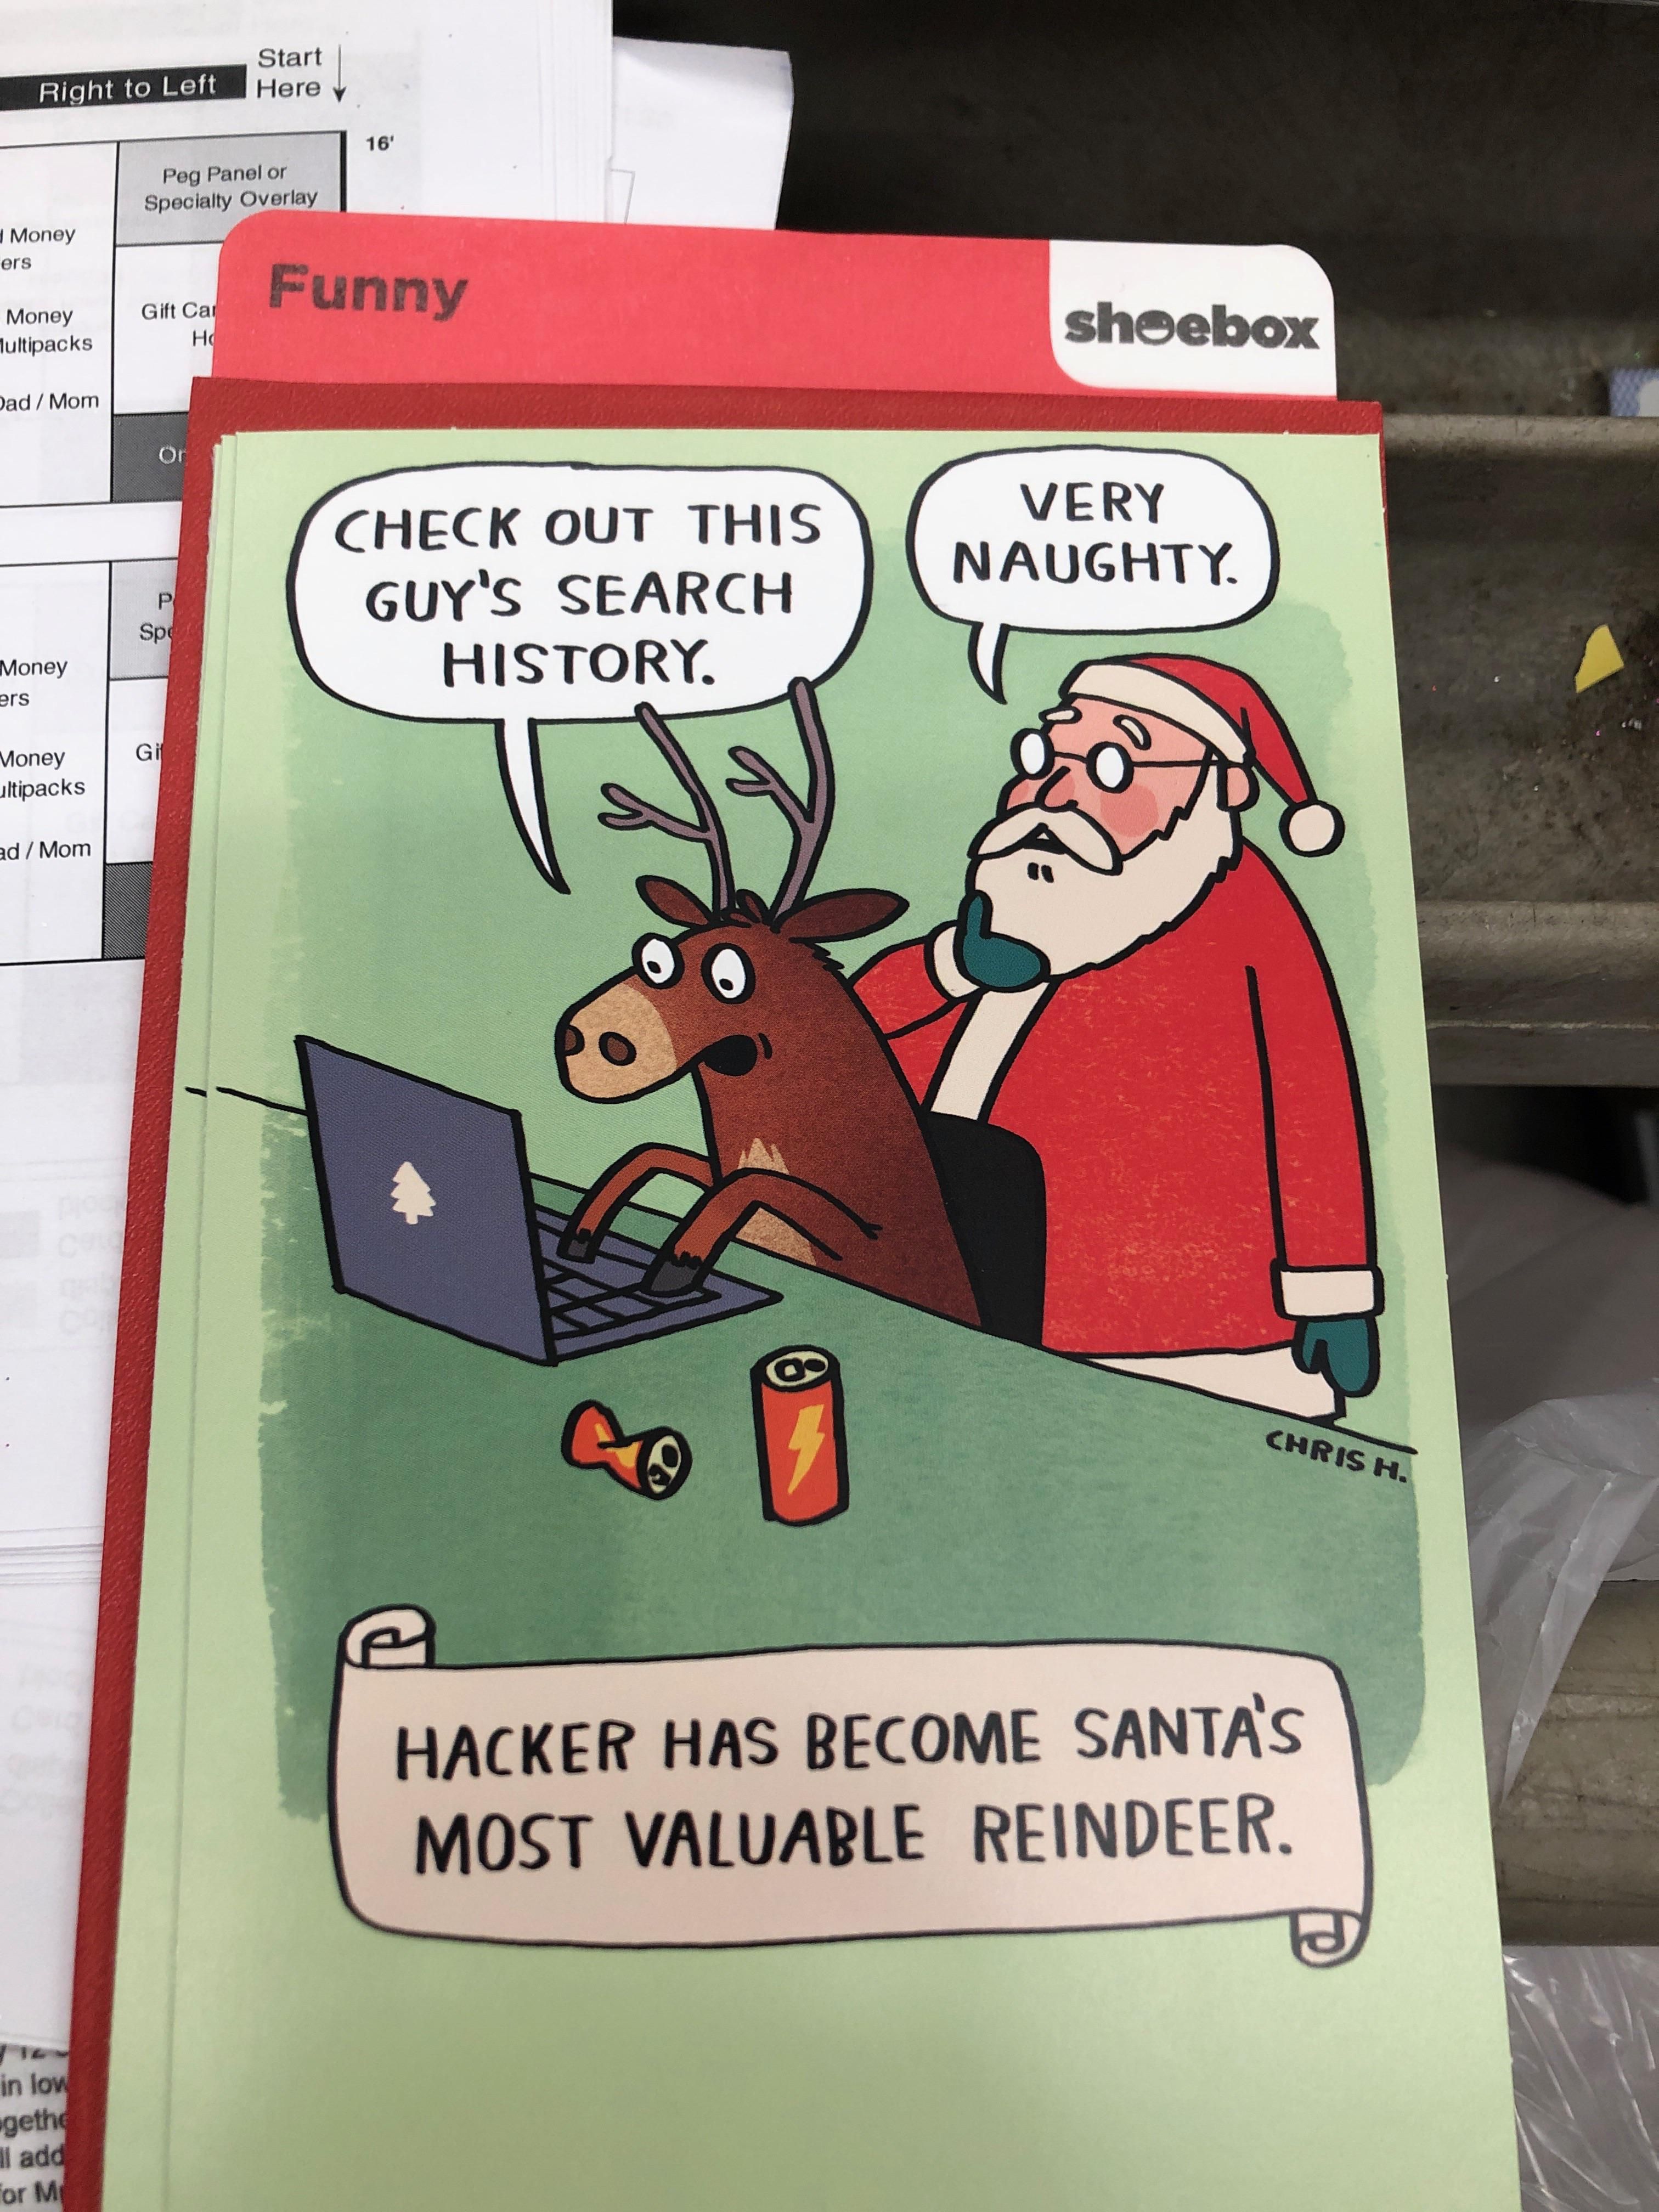 My mom puts up cards at her job and sent me this.